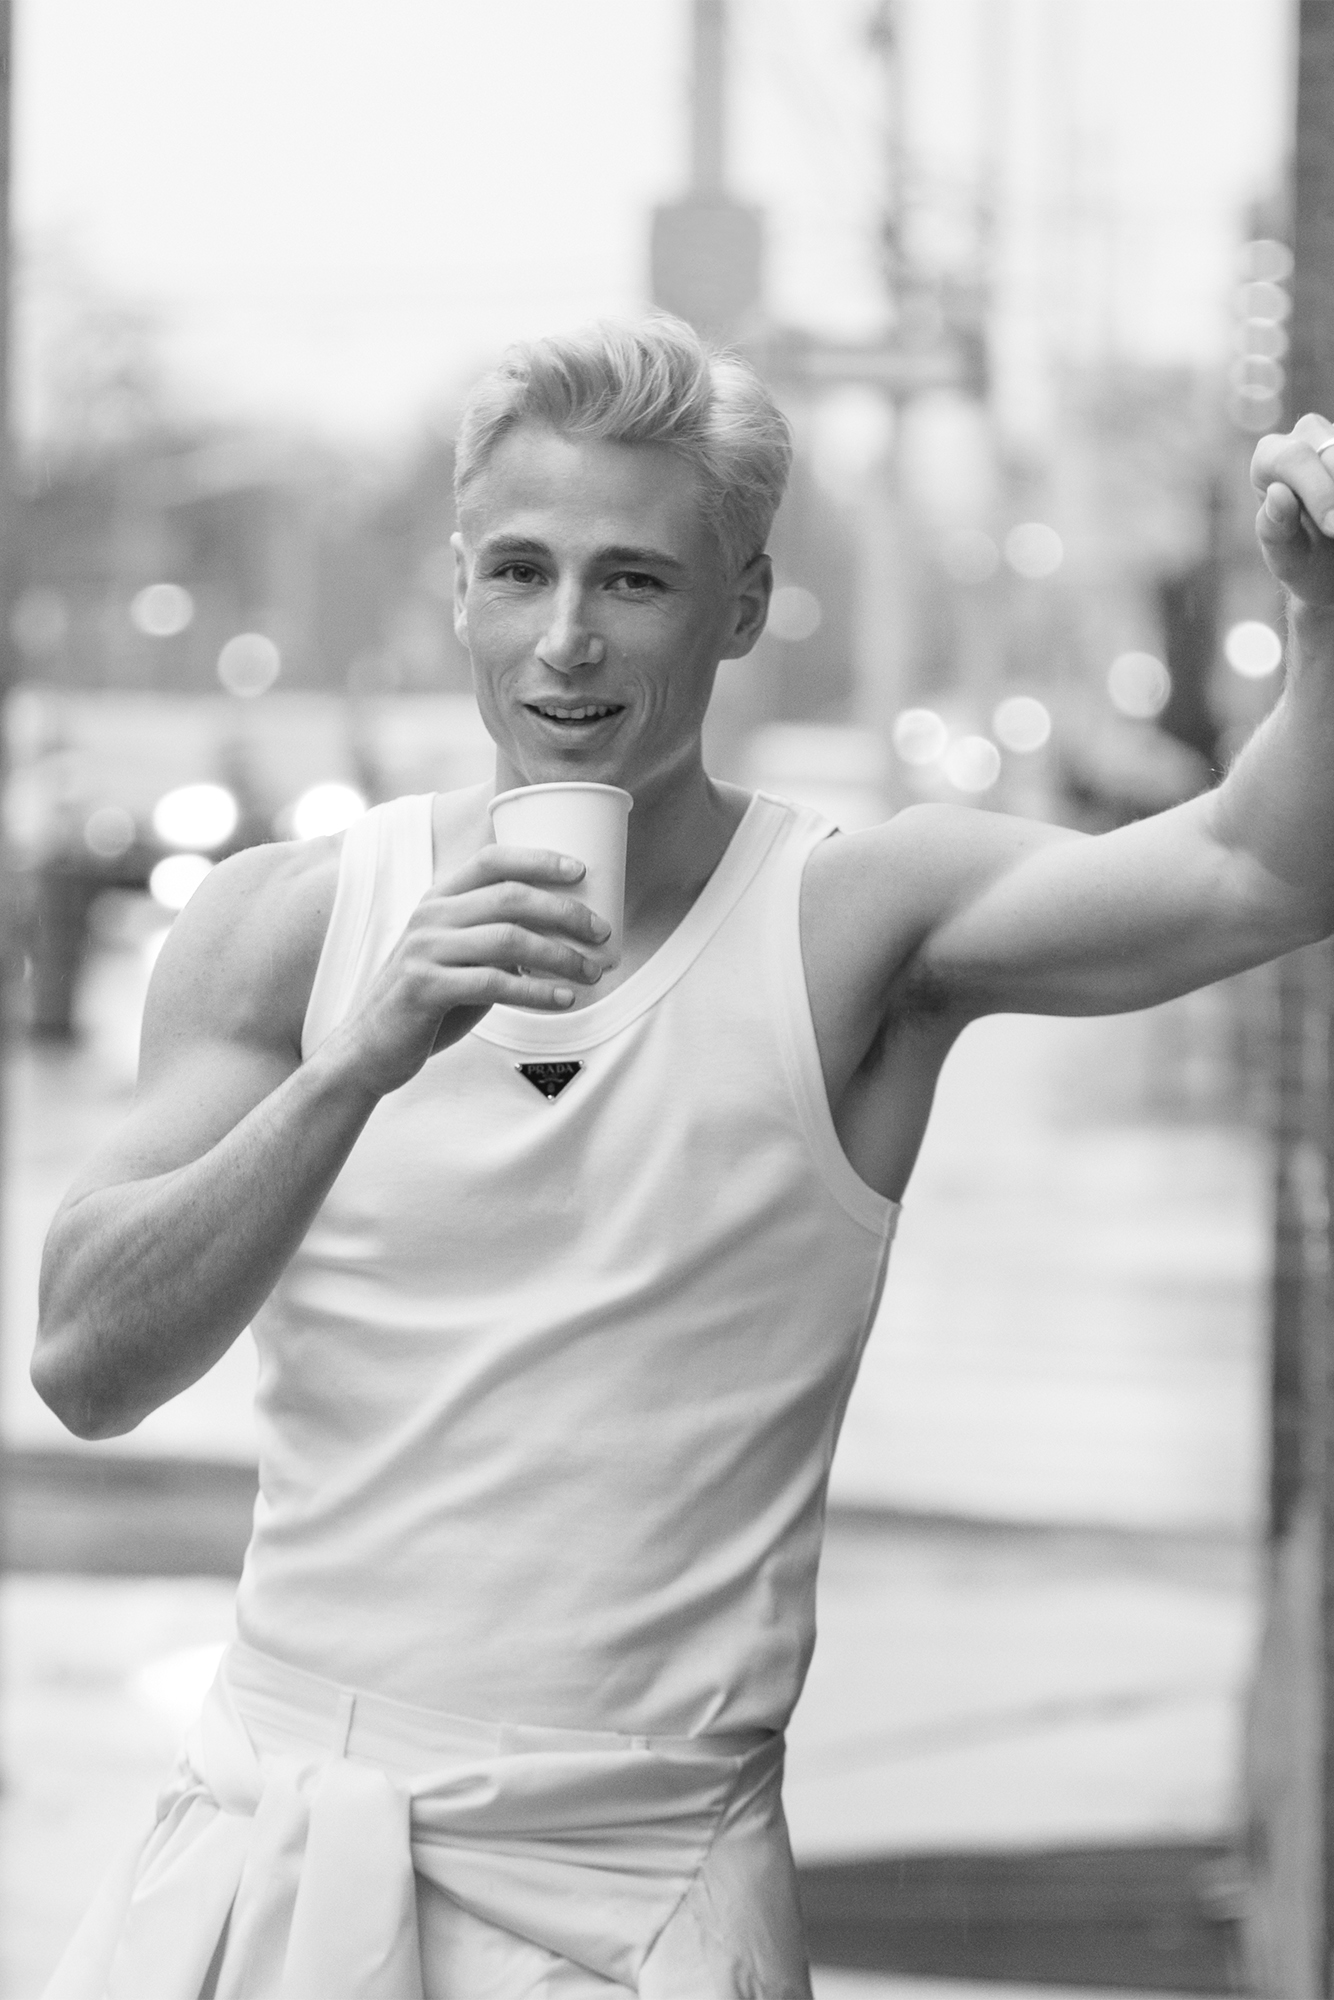 Male model in black and whiteholding drink and leaning against building in a white tank top